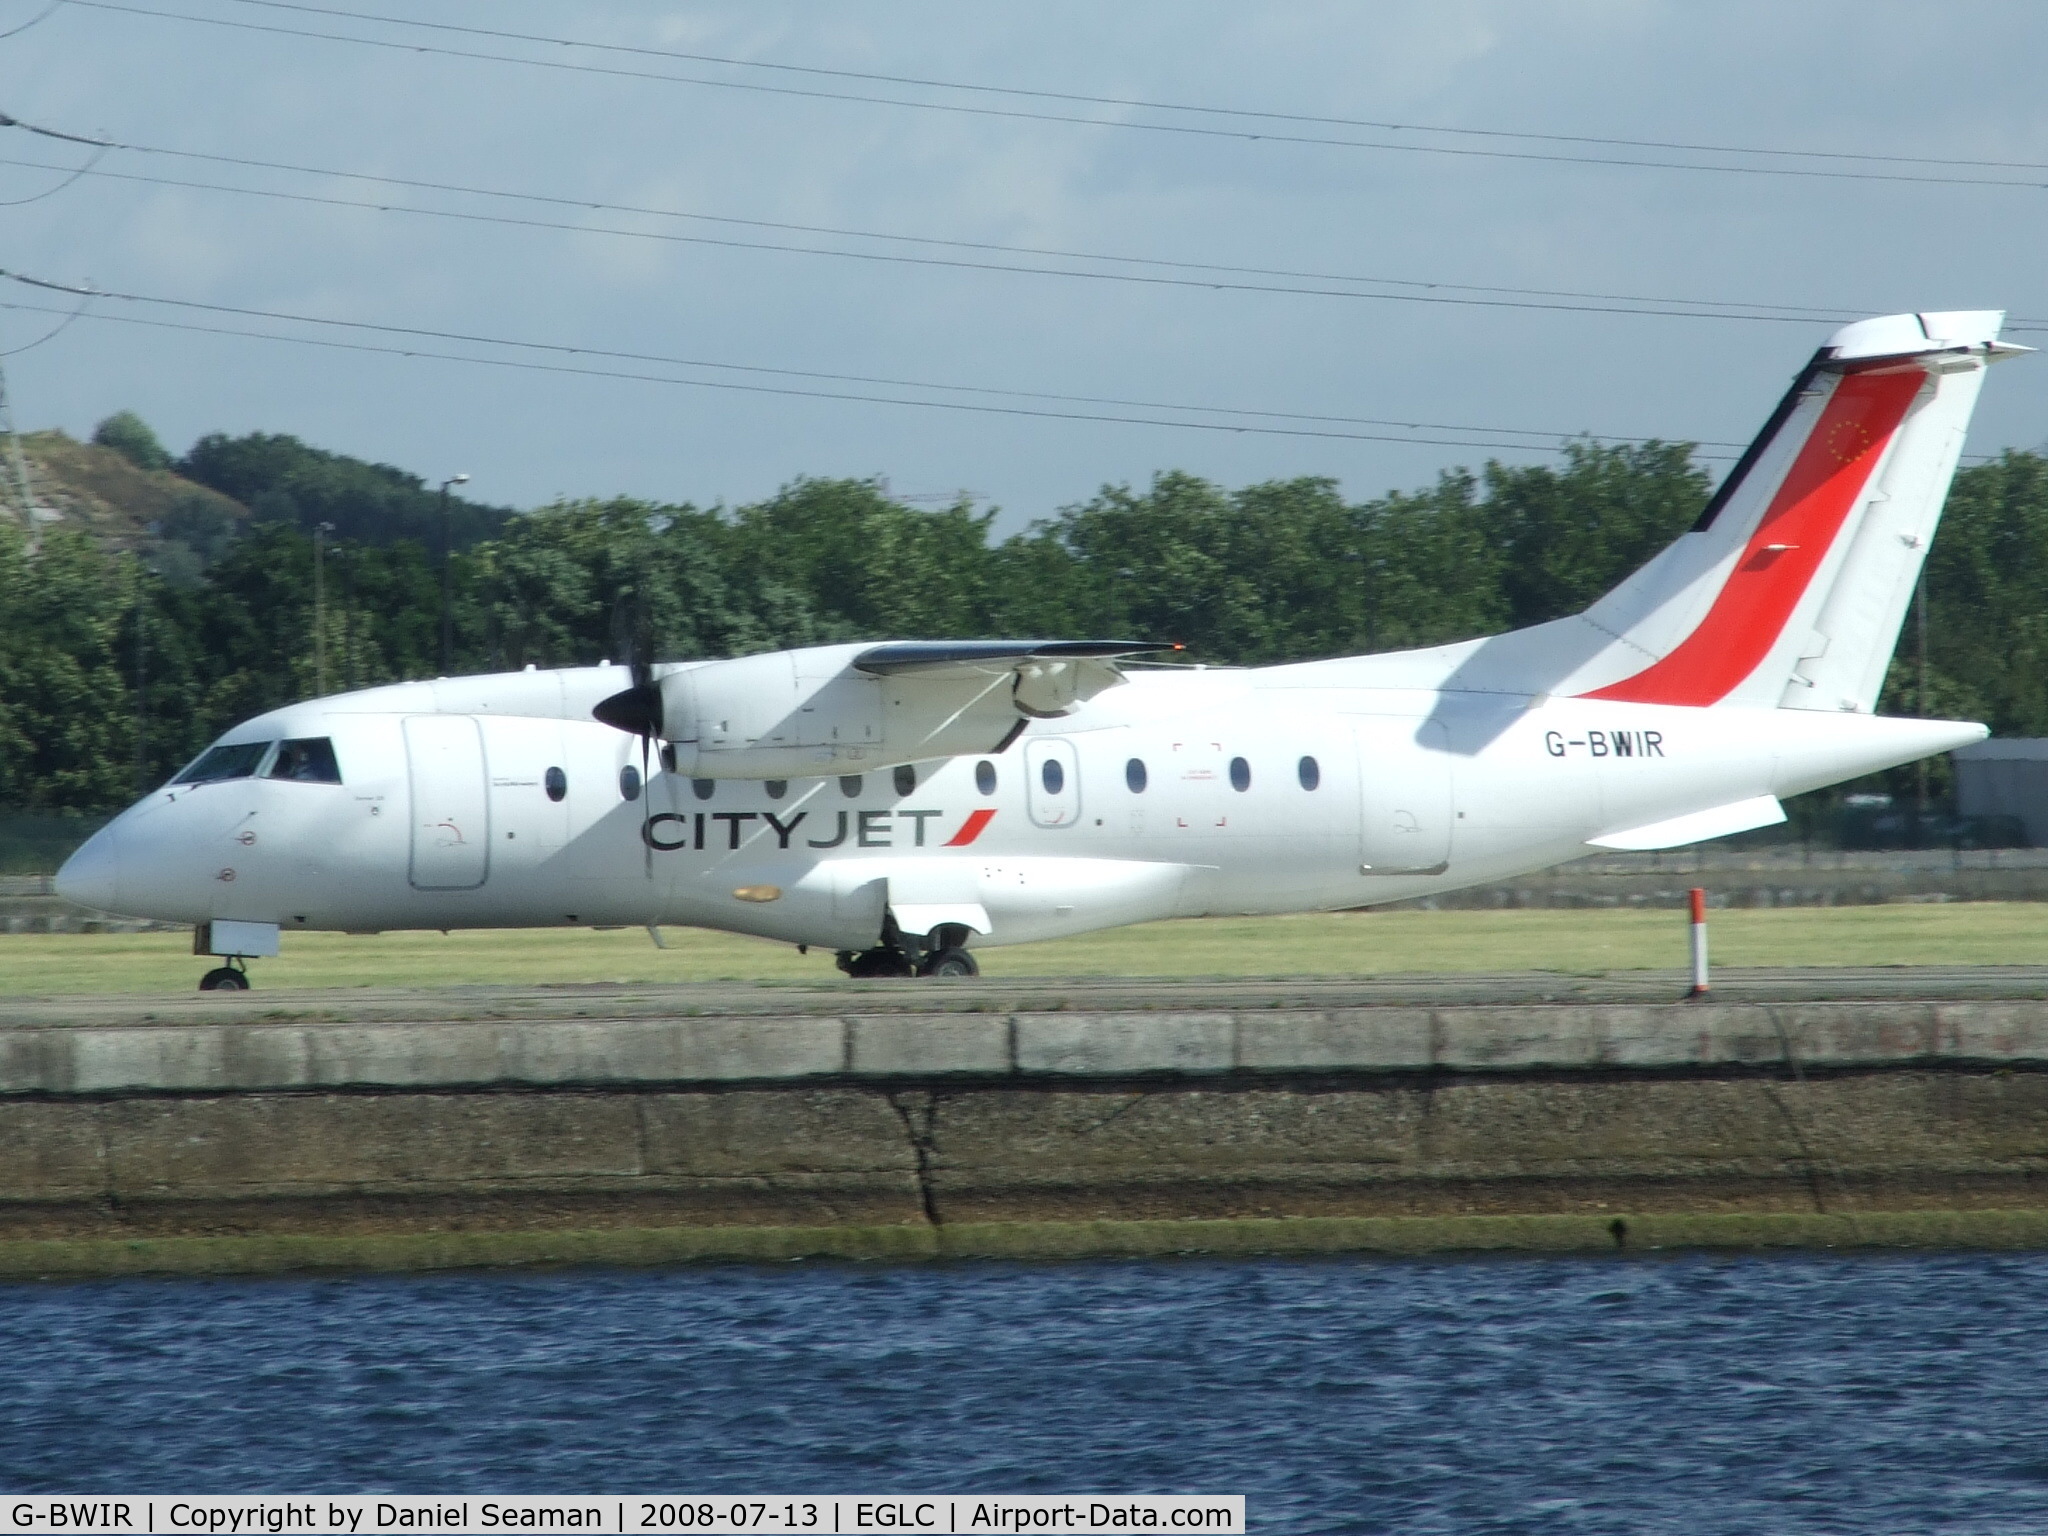 G-BWIR, 1995 Dornier 328-100 C/N 3023, the first day of a 2 day trip for me.